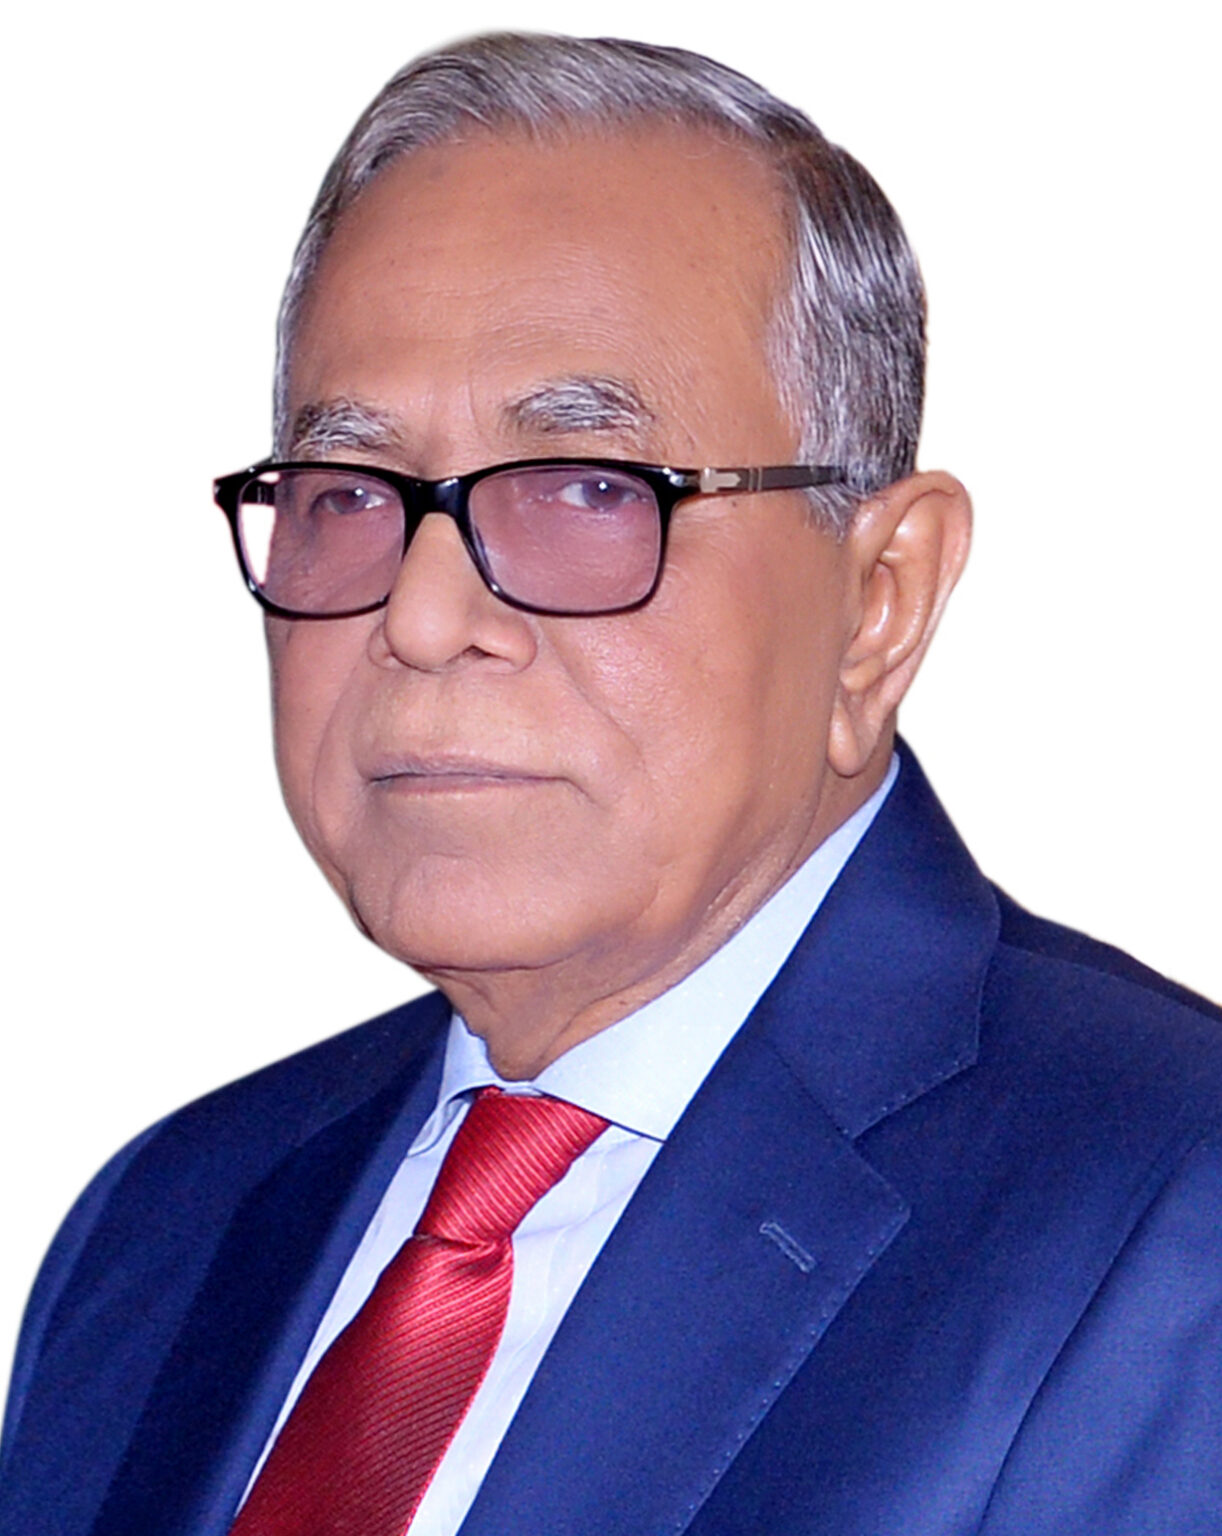 Mr. Md. Abdul Hamid Hon’ble President of the People’s Republic of